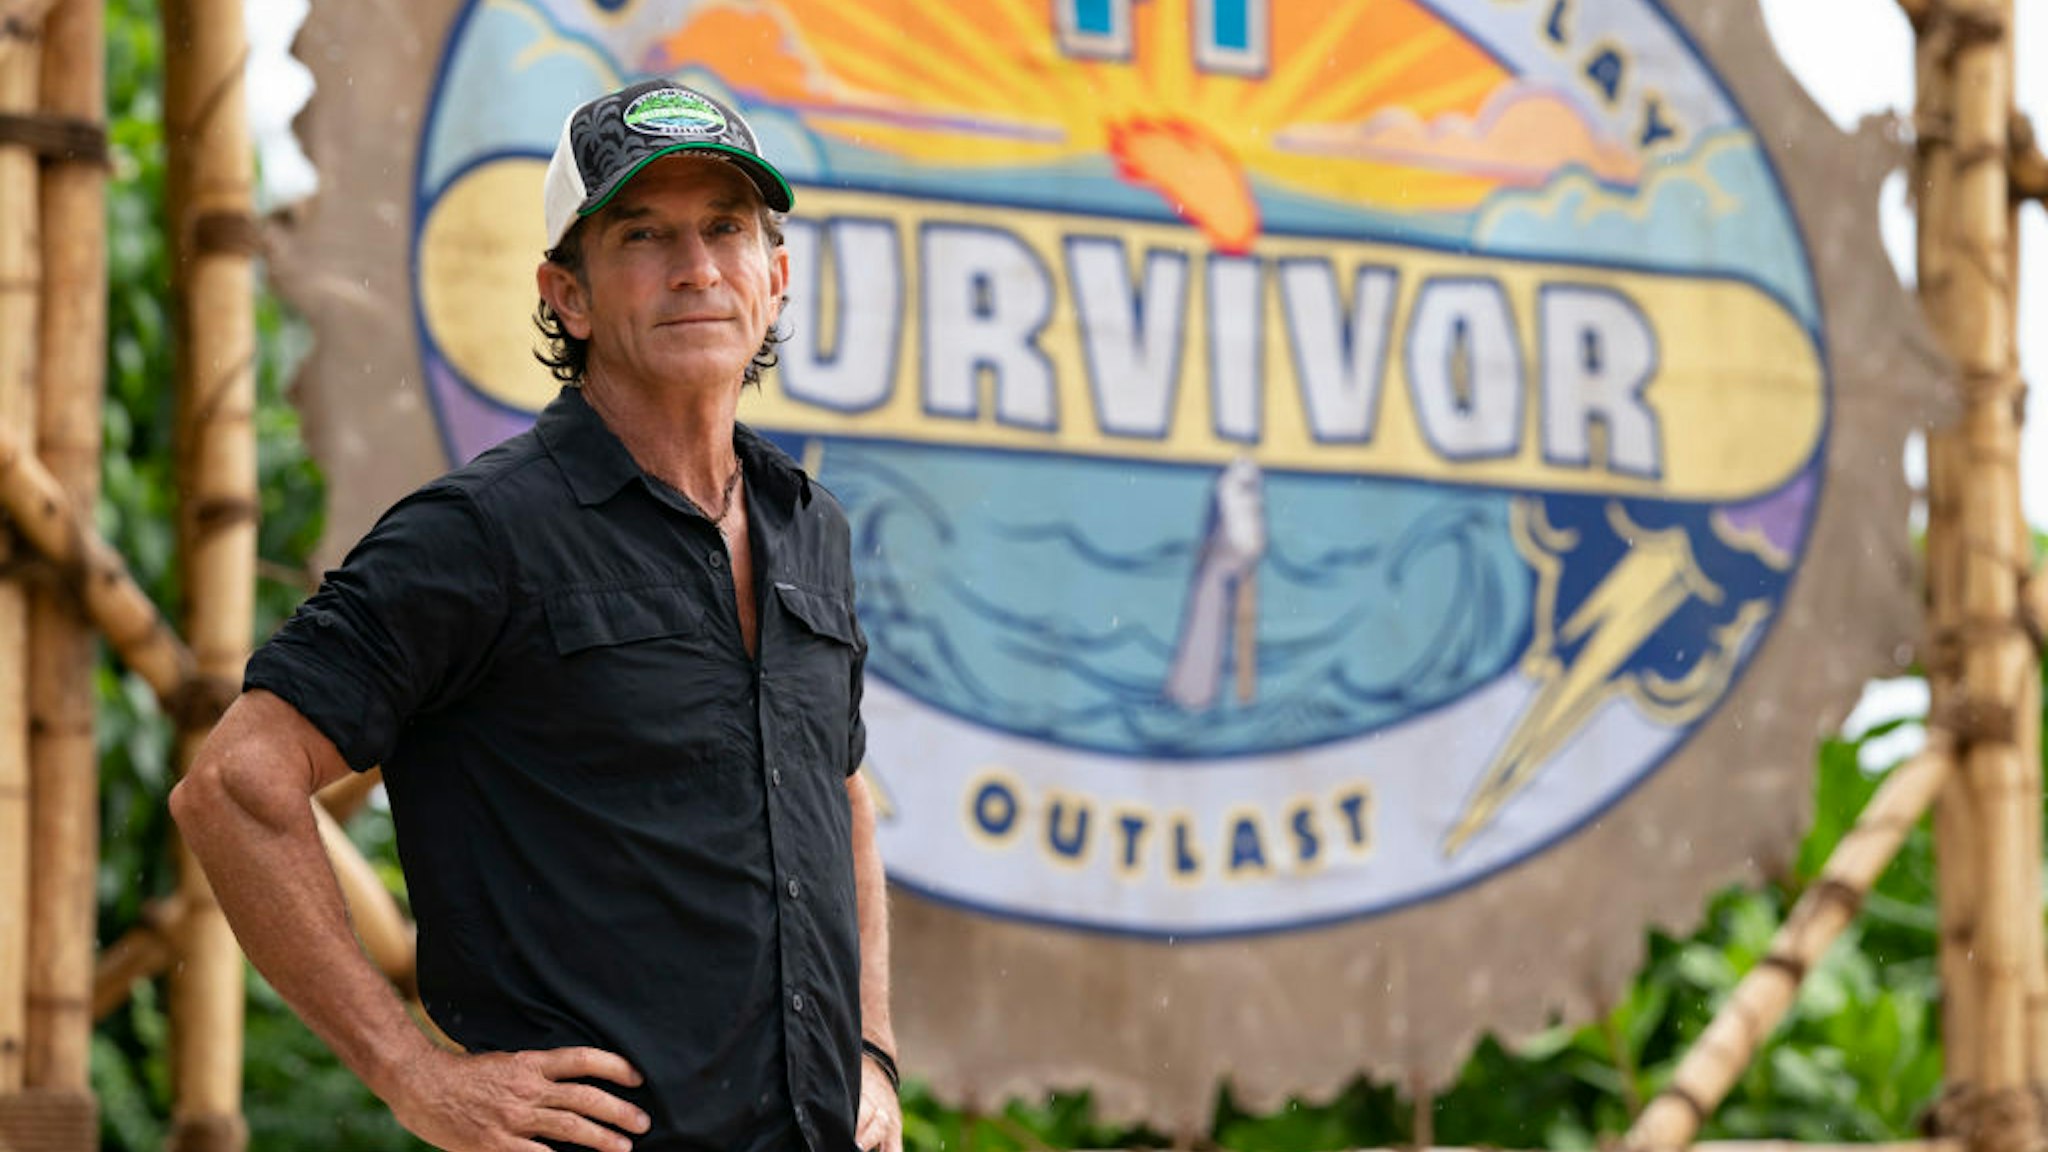 MANA ISLAND - APRIL 12: Executive Producer Jeff Probst returns to host SURVIVOR, when the Emmy Award-winning series returns for its 41st season, with a special 2-hour premiere, Wednesday, Sept. 22 (8:00-10 PM, ET/PT) on the CBS Television Network. (Photo by Robert Voets/CBS via Getty Images)